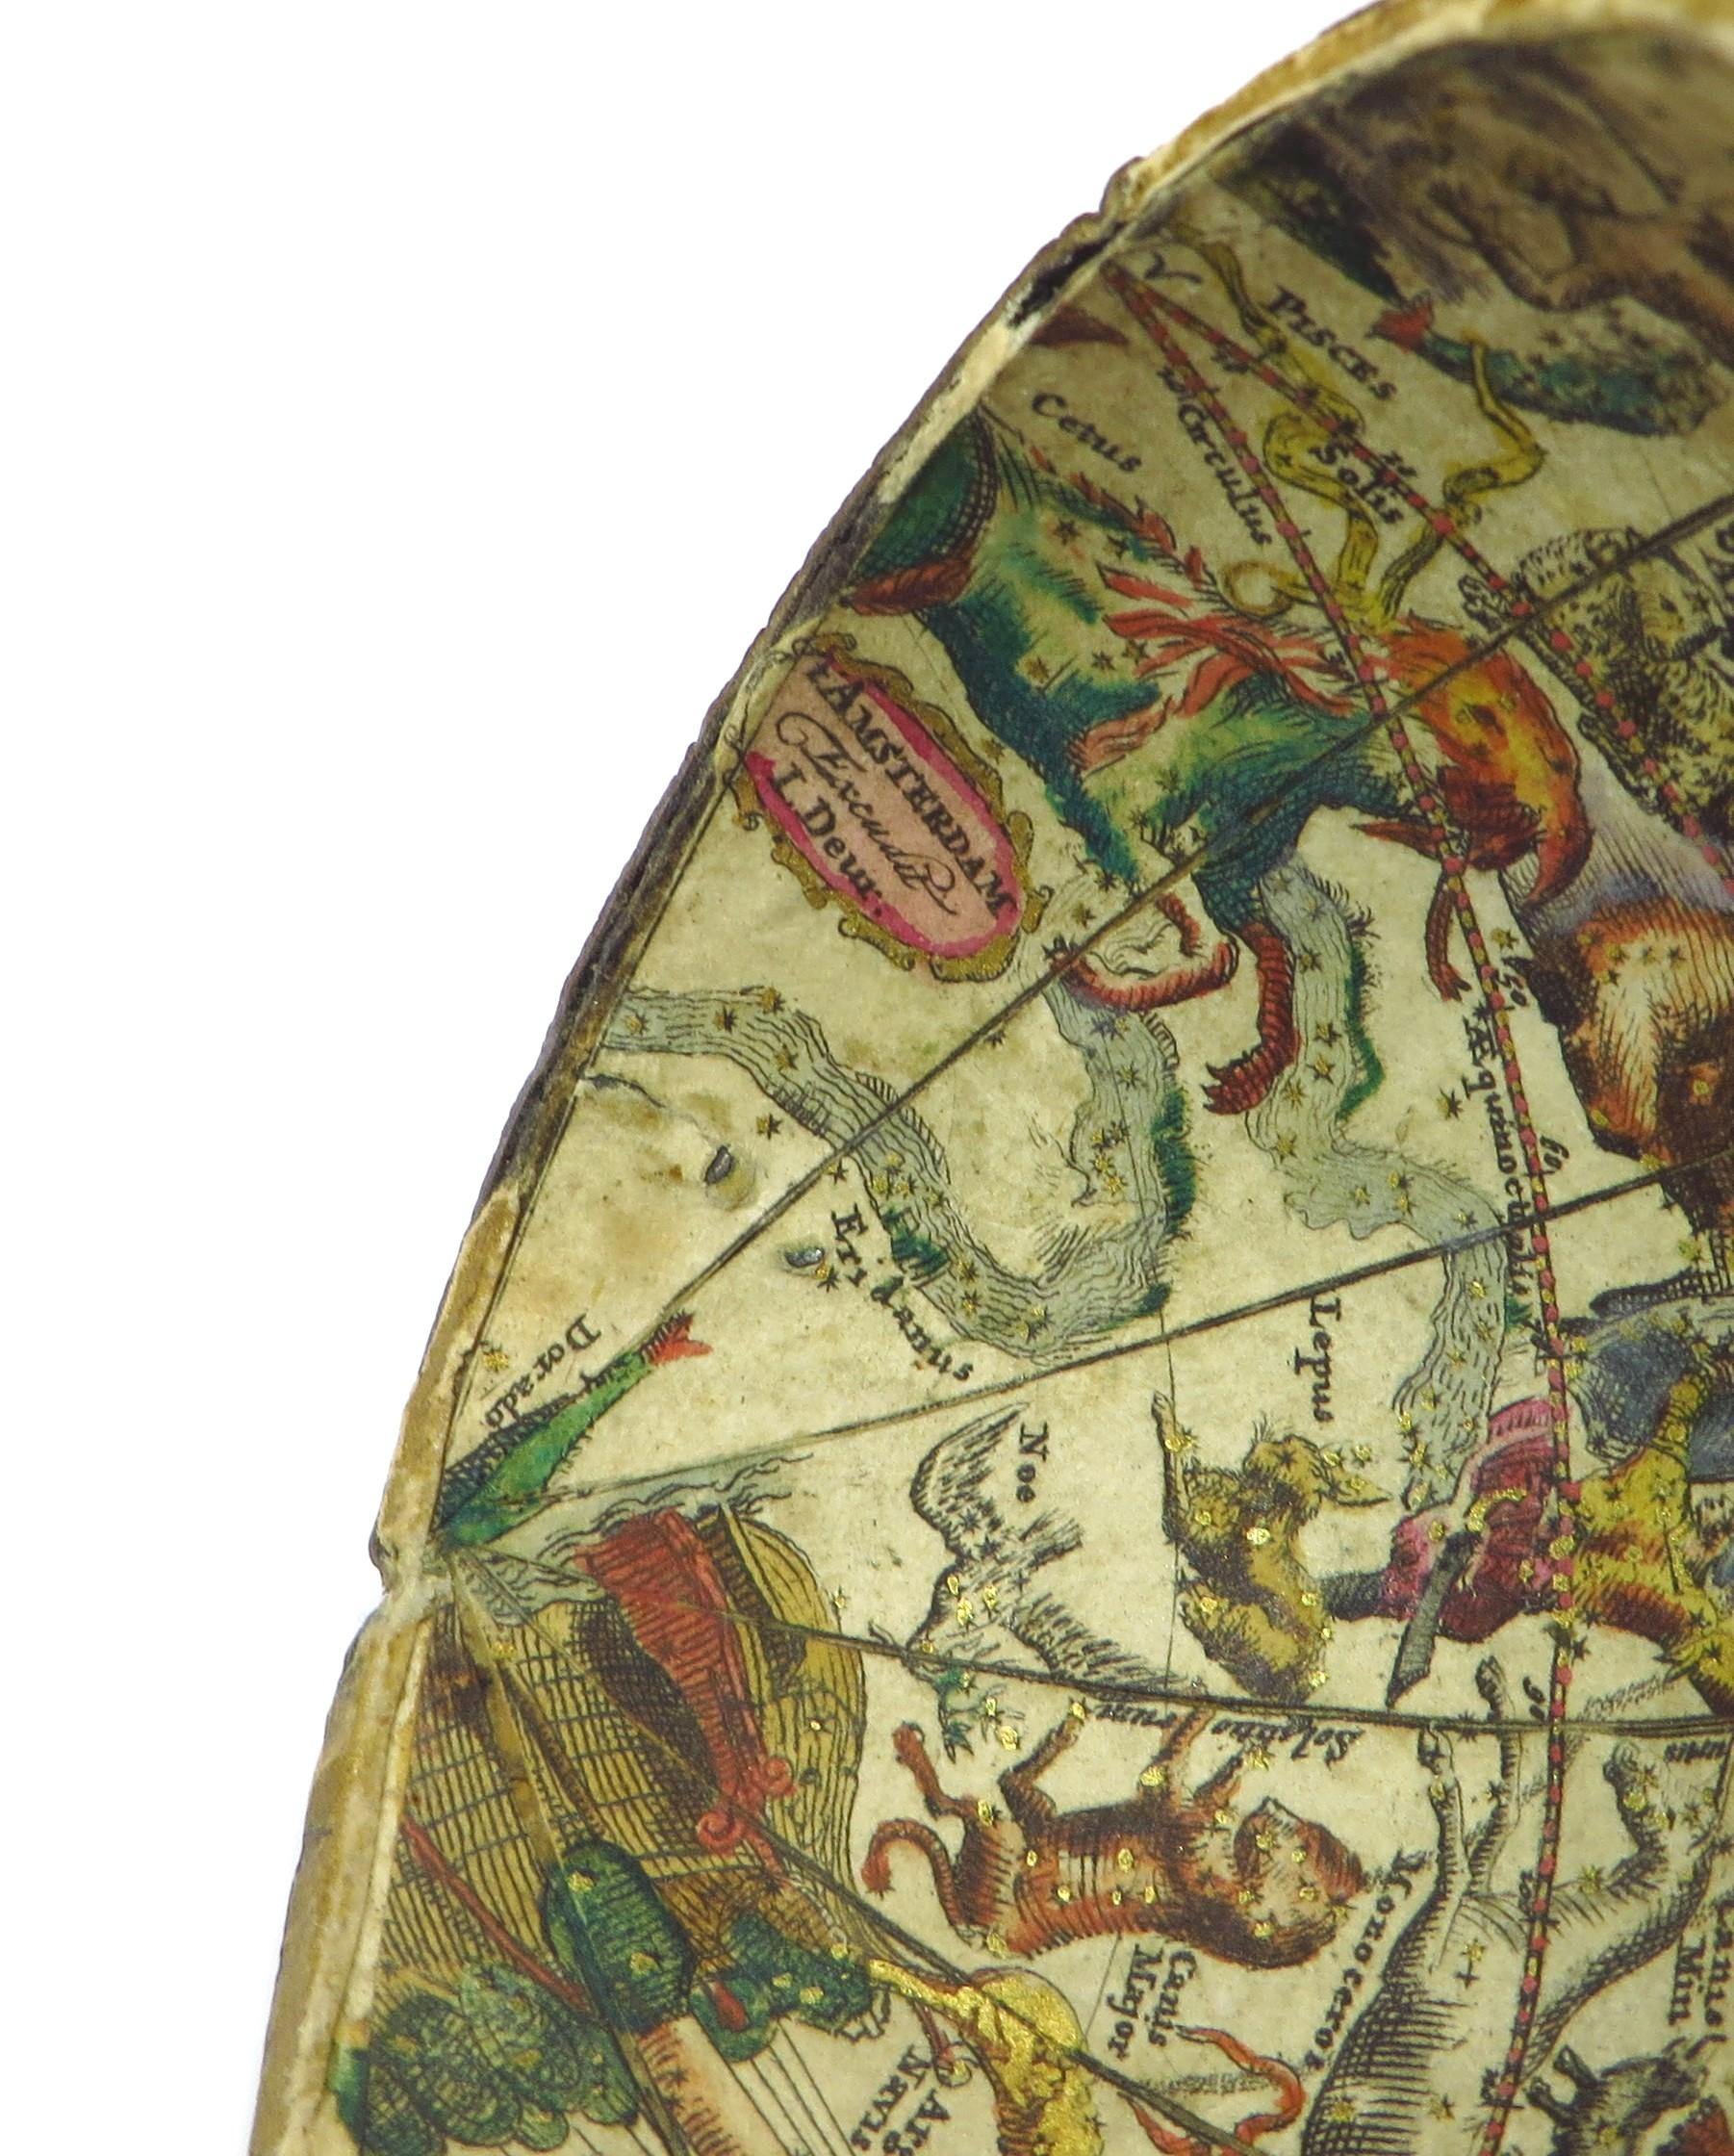 Hand-Painted Wonderful and extremely rare Dutch pocketglobe For Sale